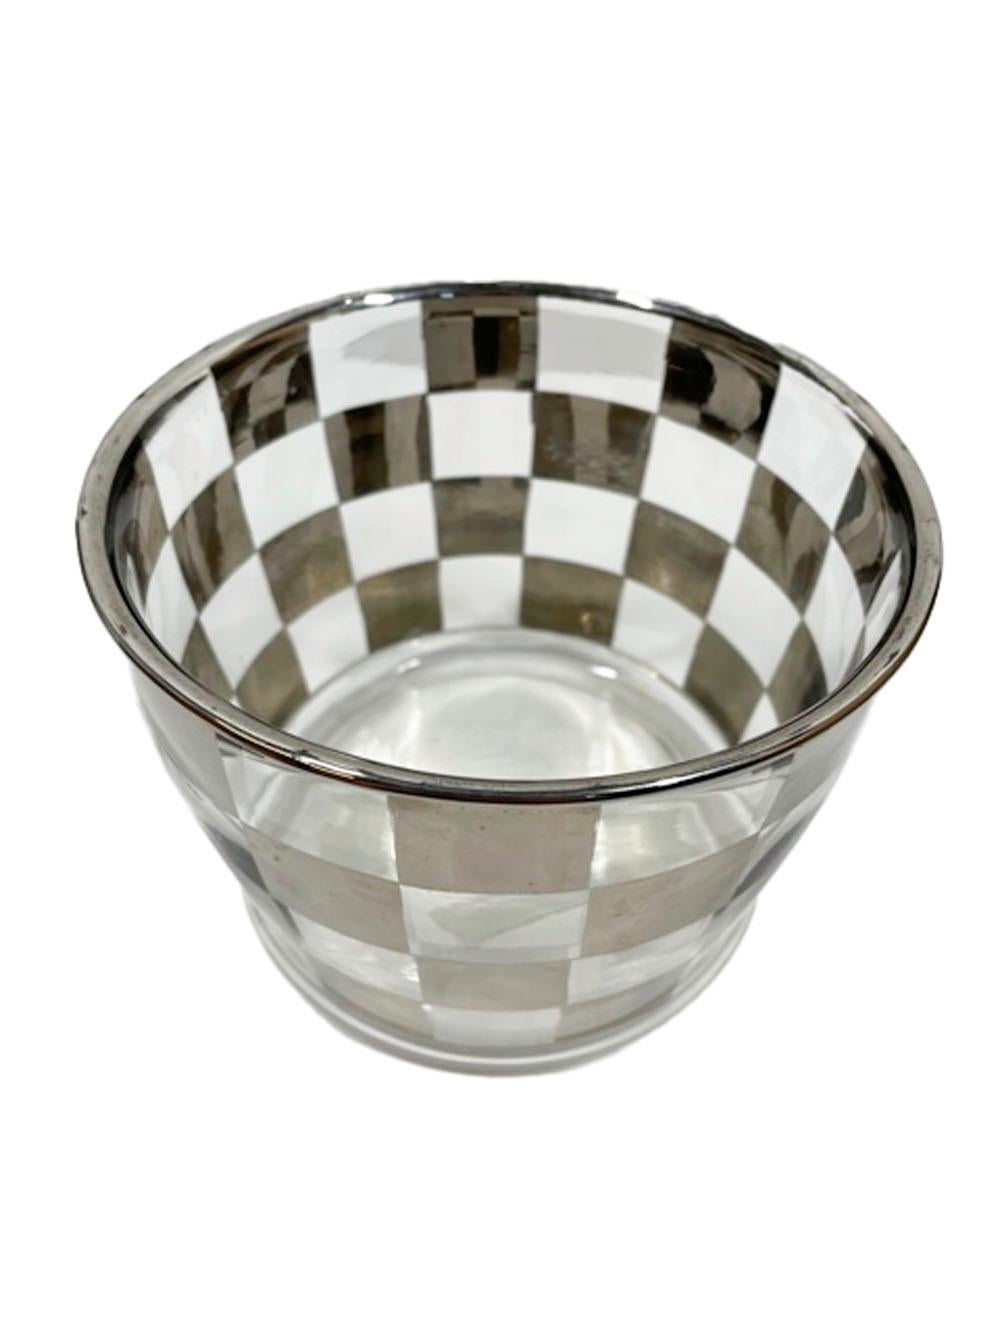 Art Deco Cocktail Set with Silver Check Pattern on Ribbed Optical Glass 1